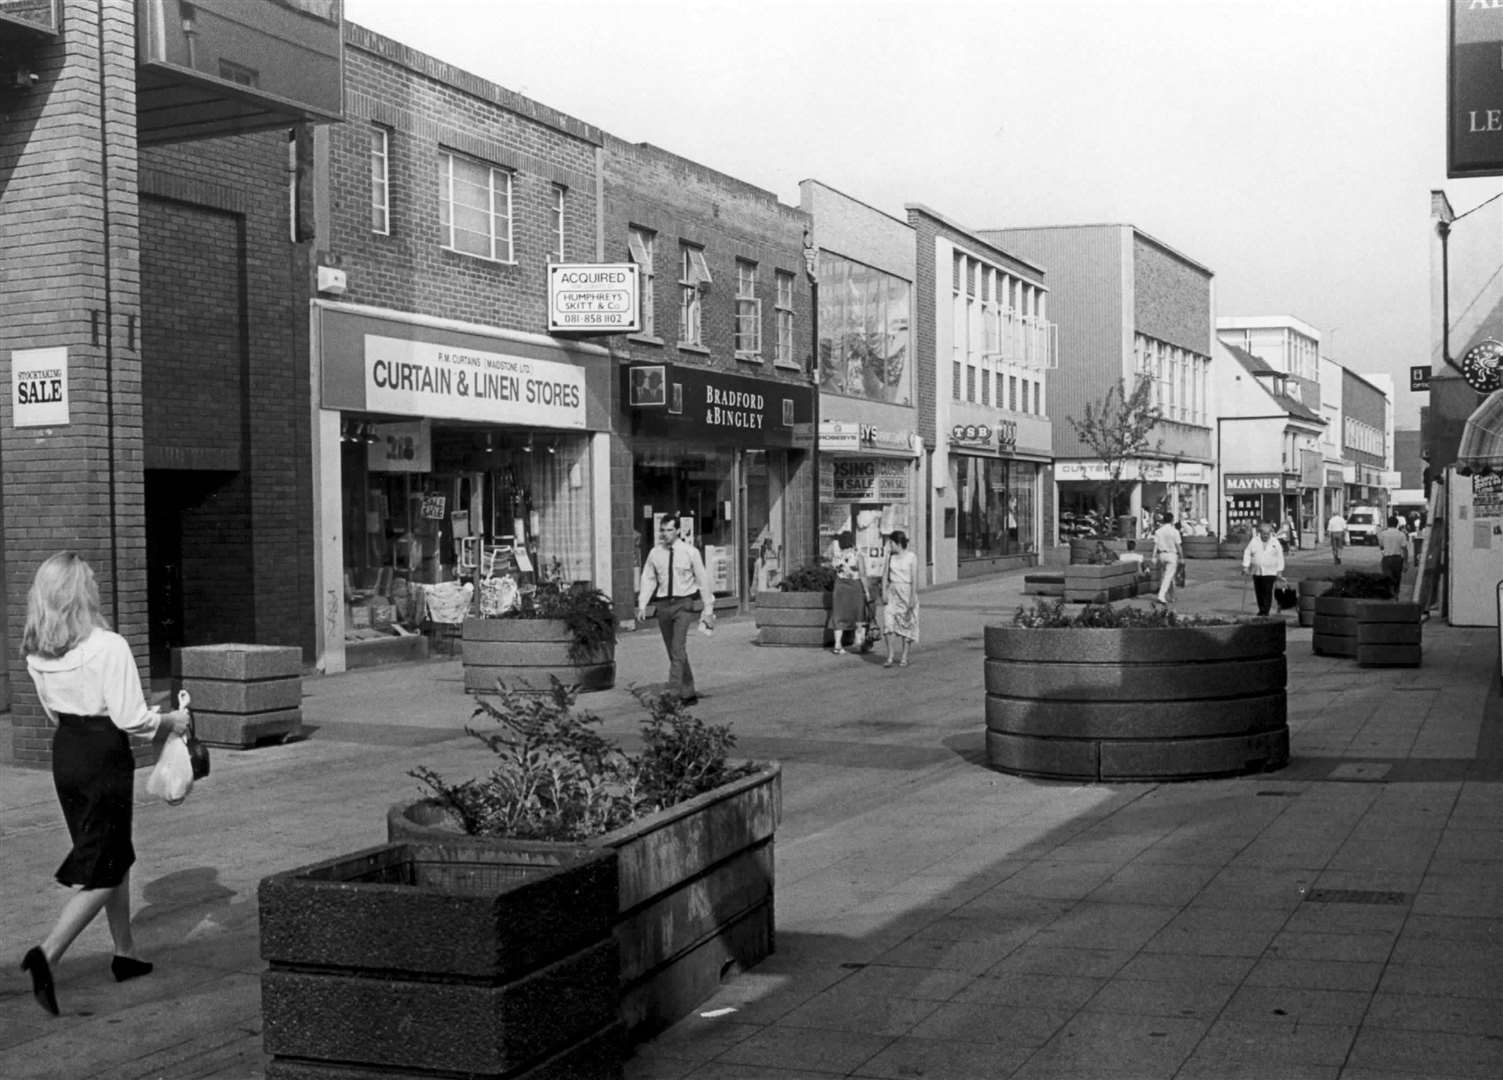 Chatham High Street pictured in 1990